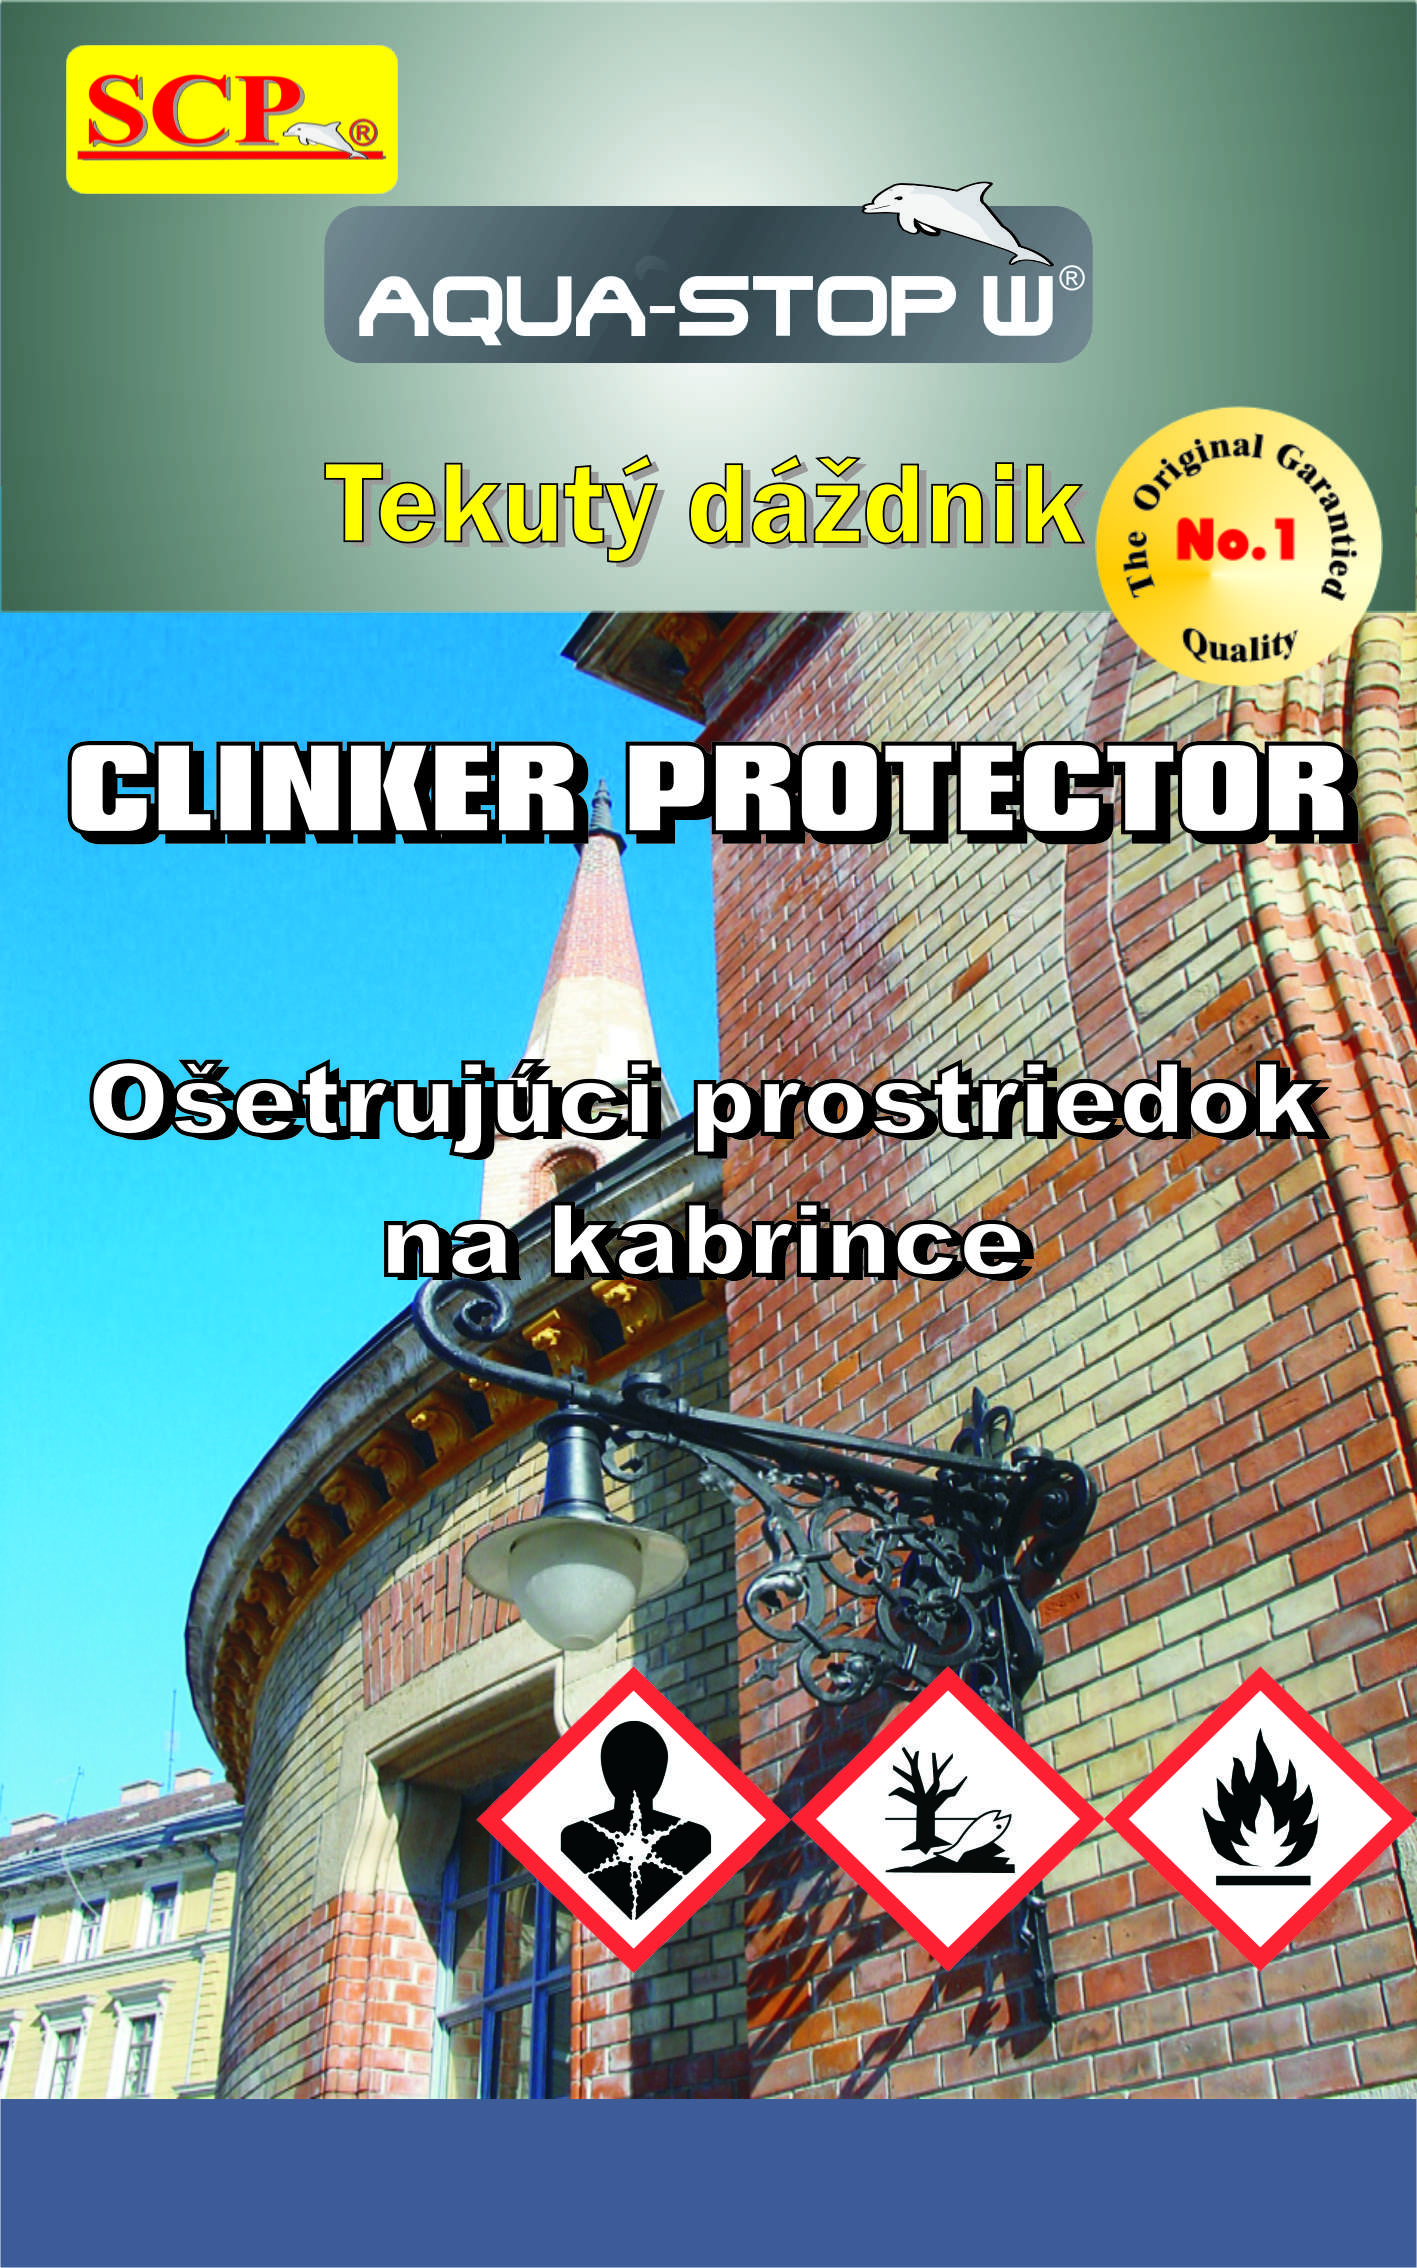 Clinker Protector